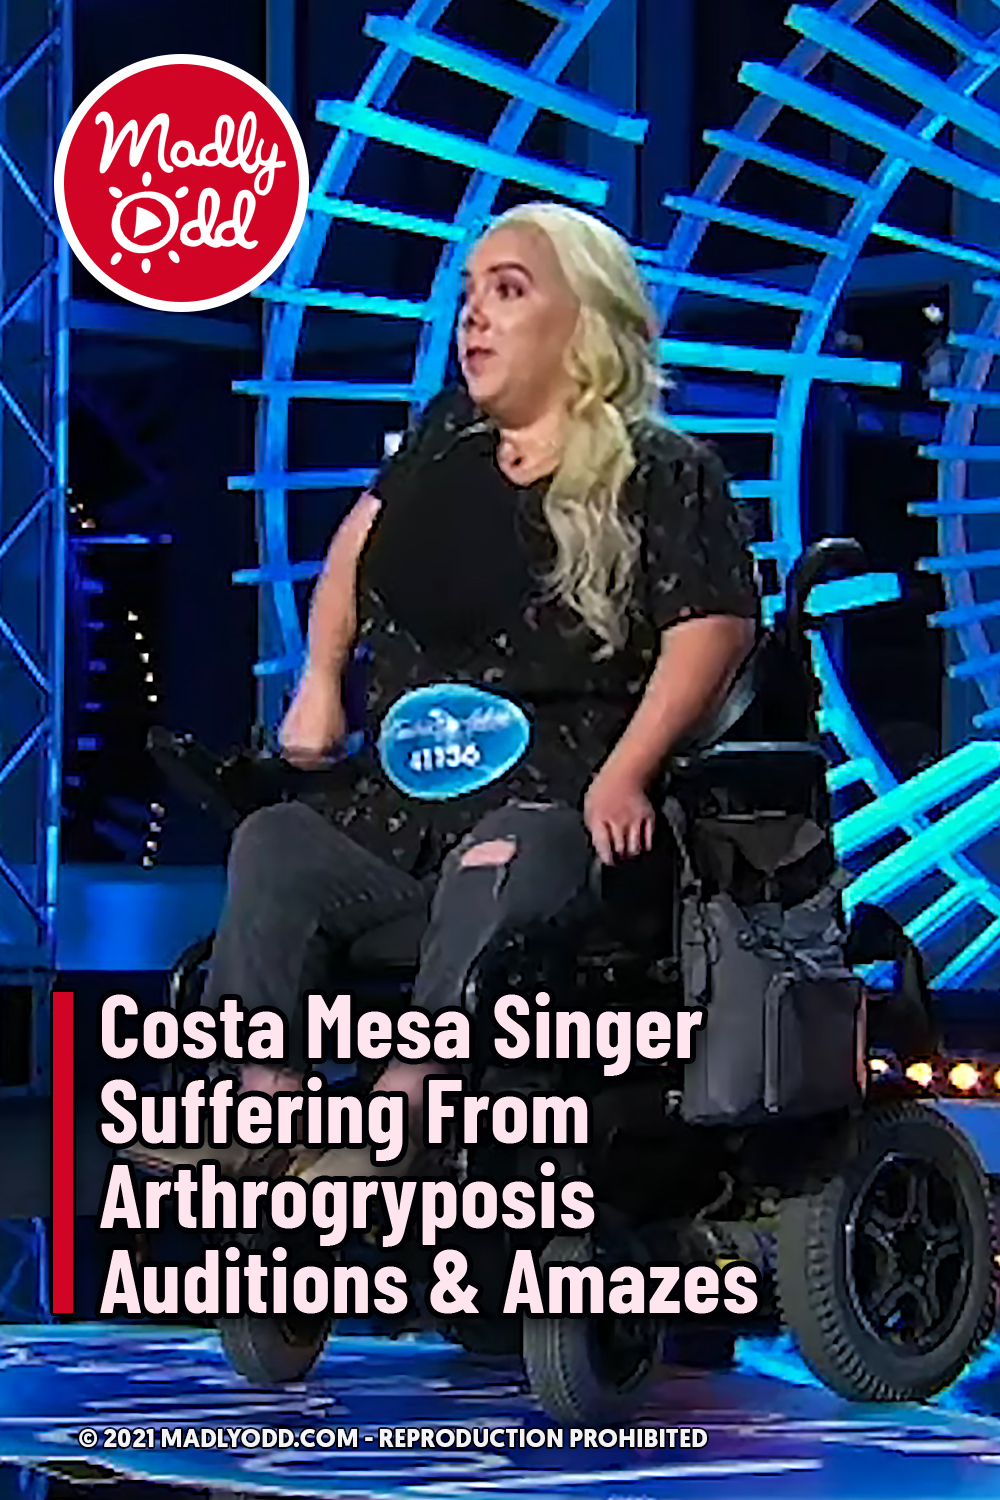 Costa Mesa Singer Suffering From Arthrogryposis Auditions & Amazes